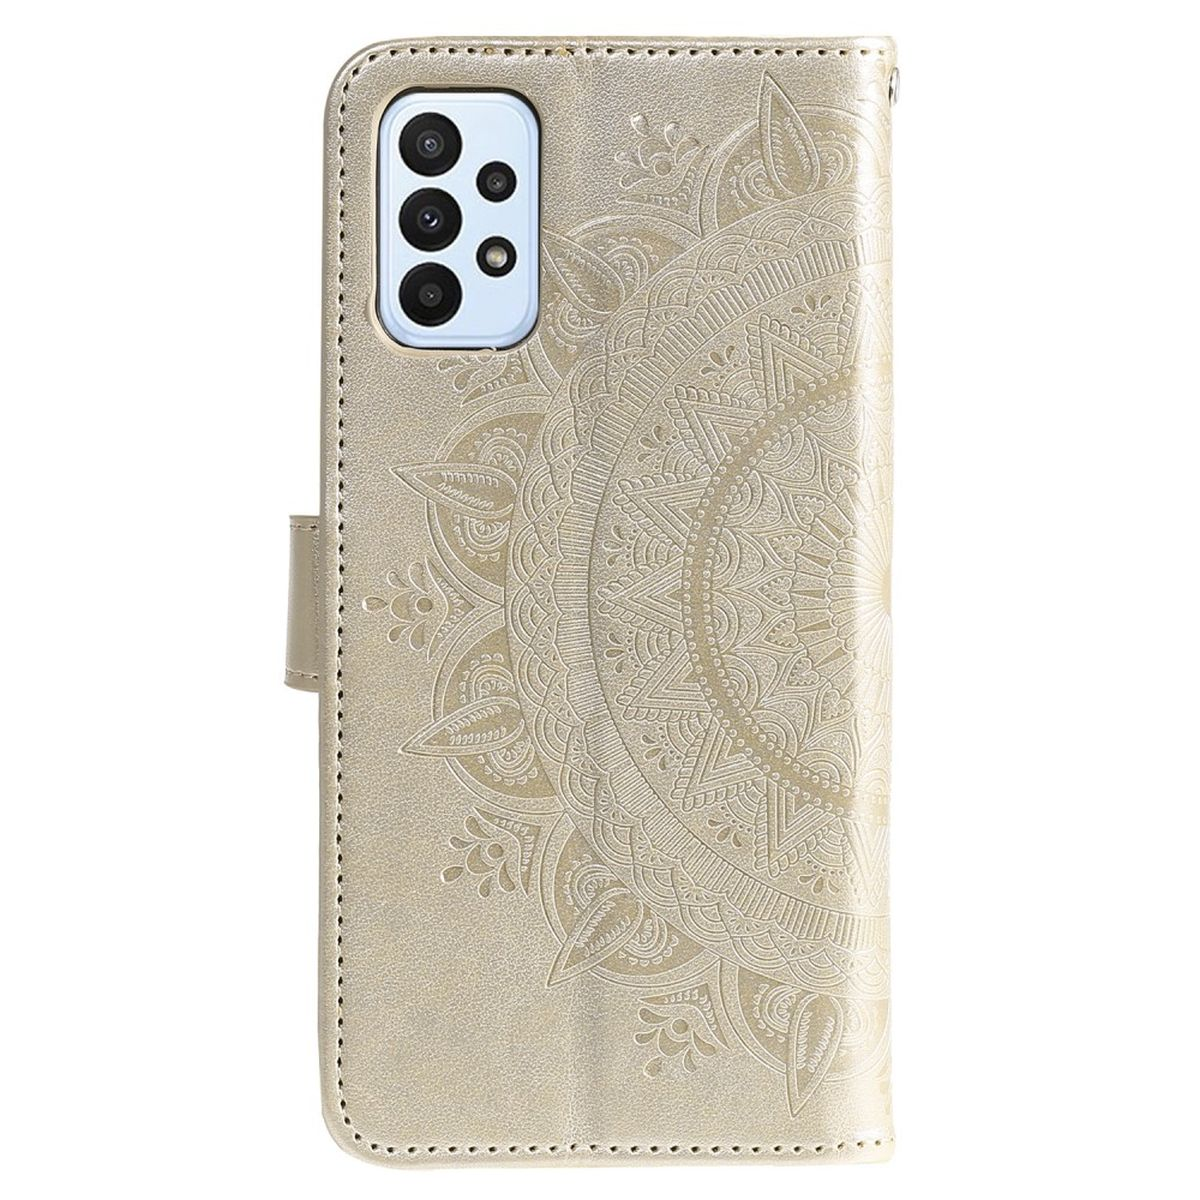 A23, Galaxy Gold Klapphülle Bookcover, COVERKINGZ Samsung, Muster, mit Mandala